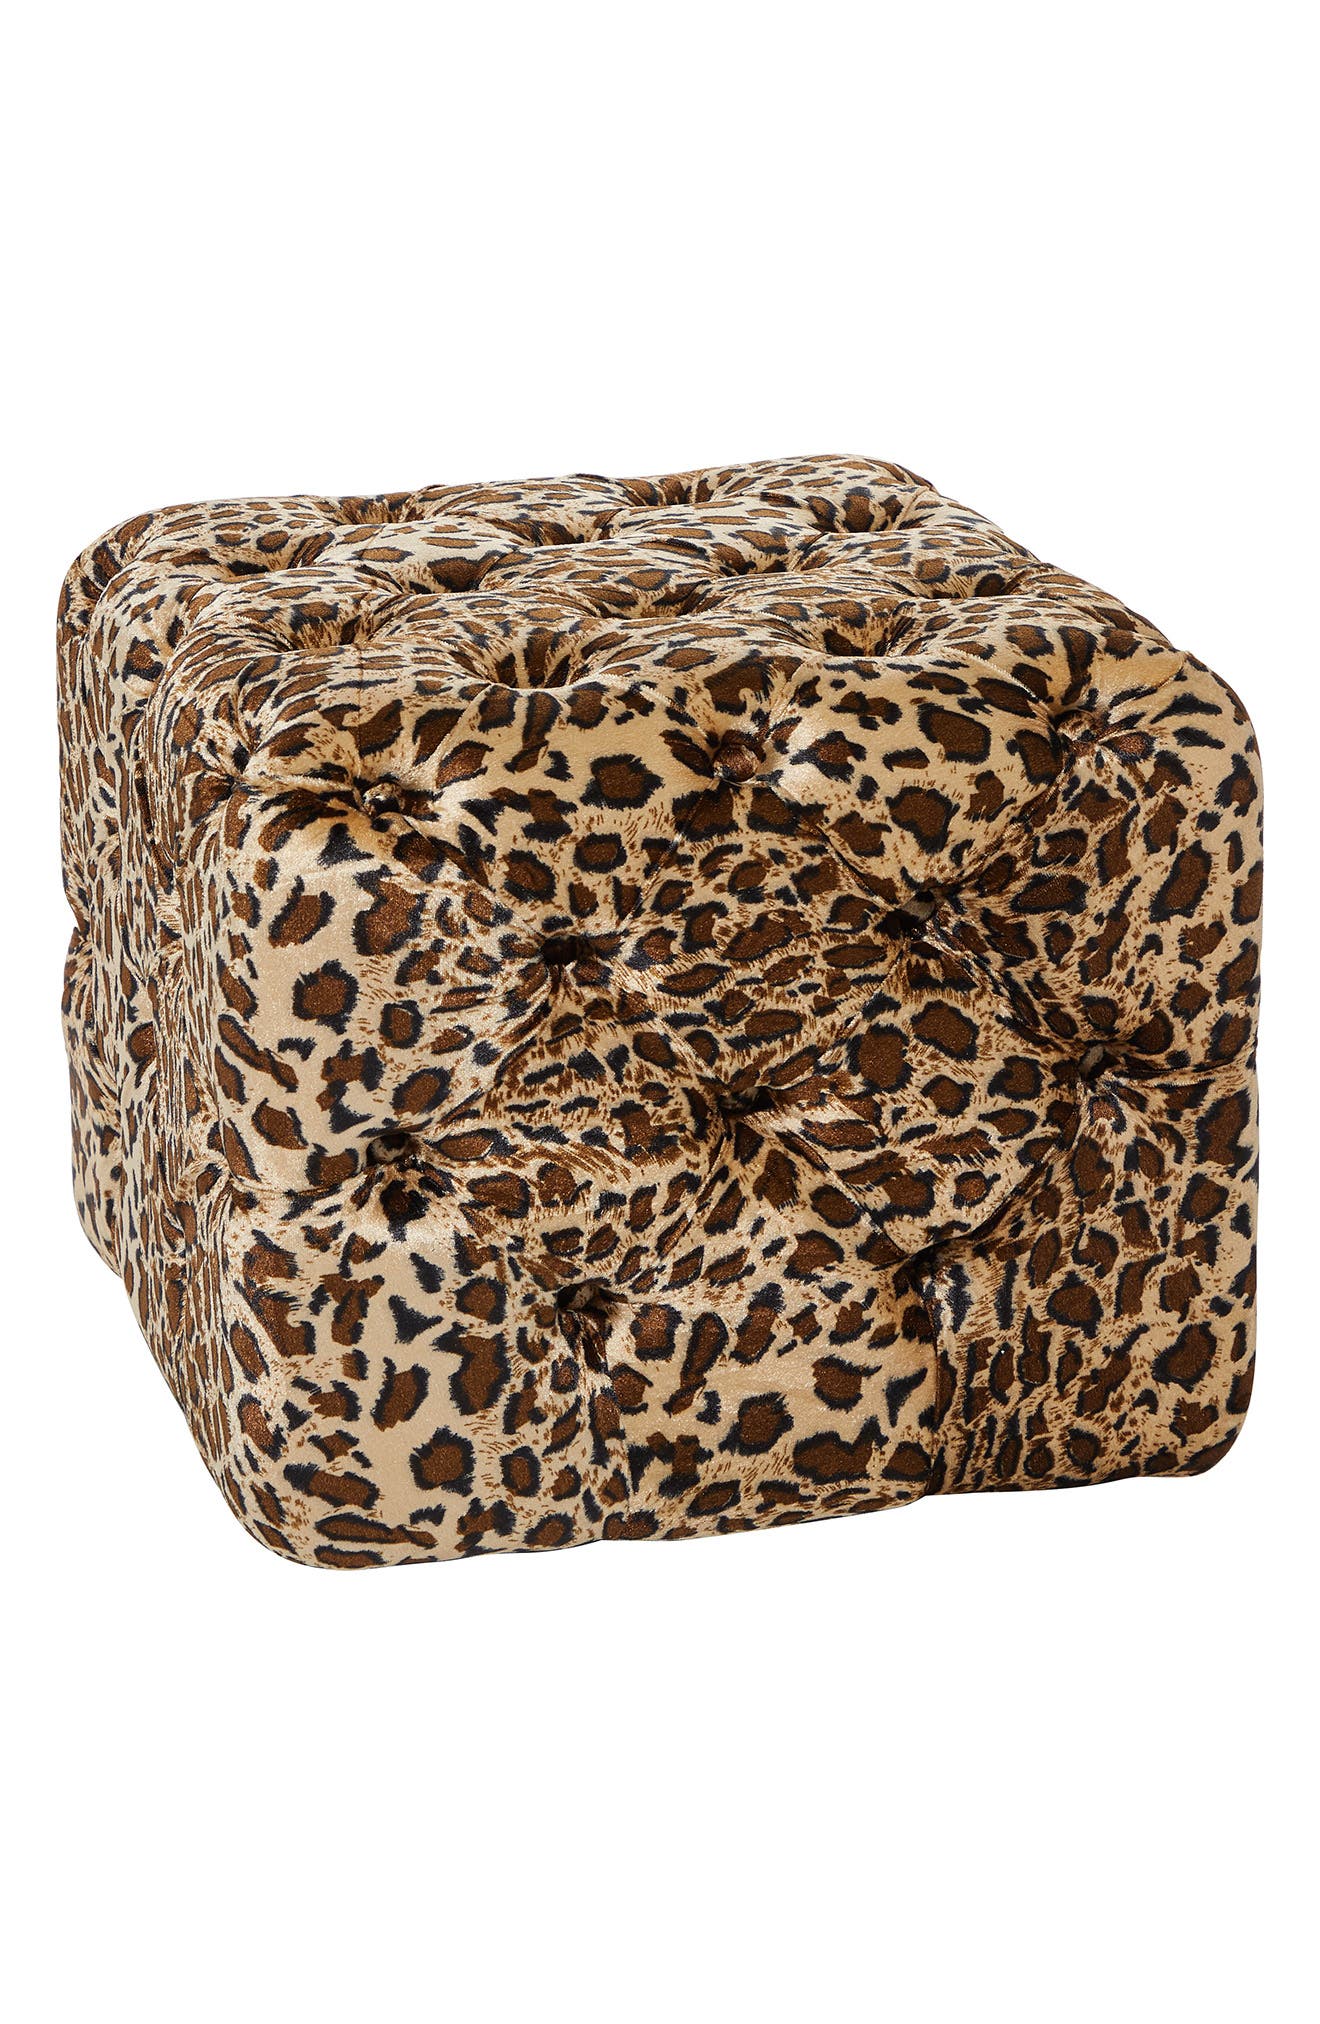 Willow Row Brown Wood & Fabric Glam Ottoman